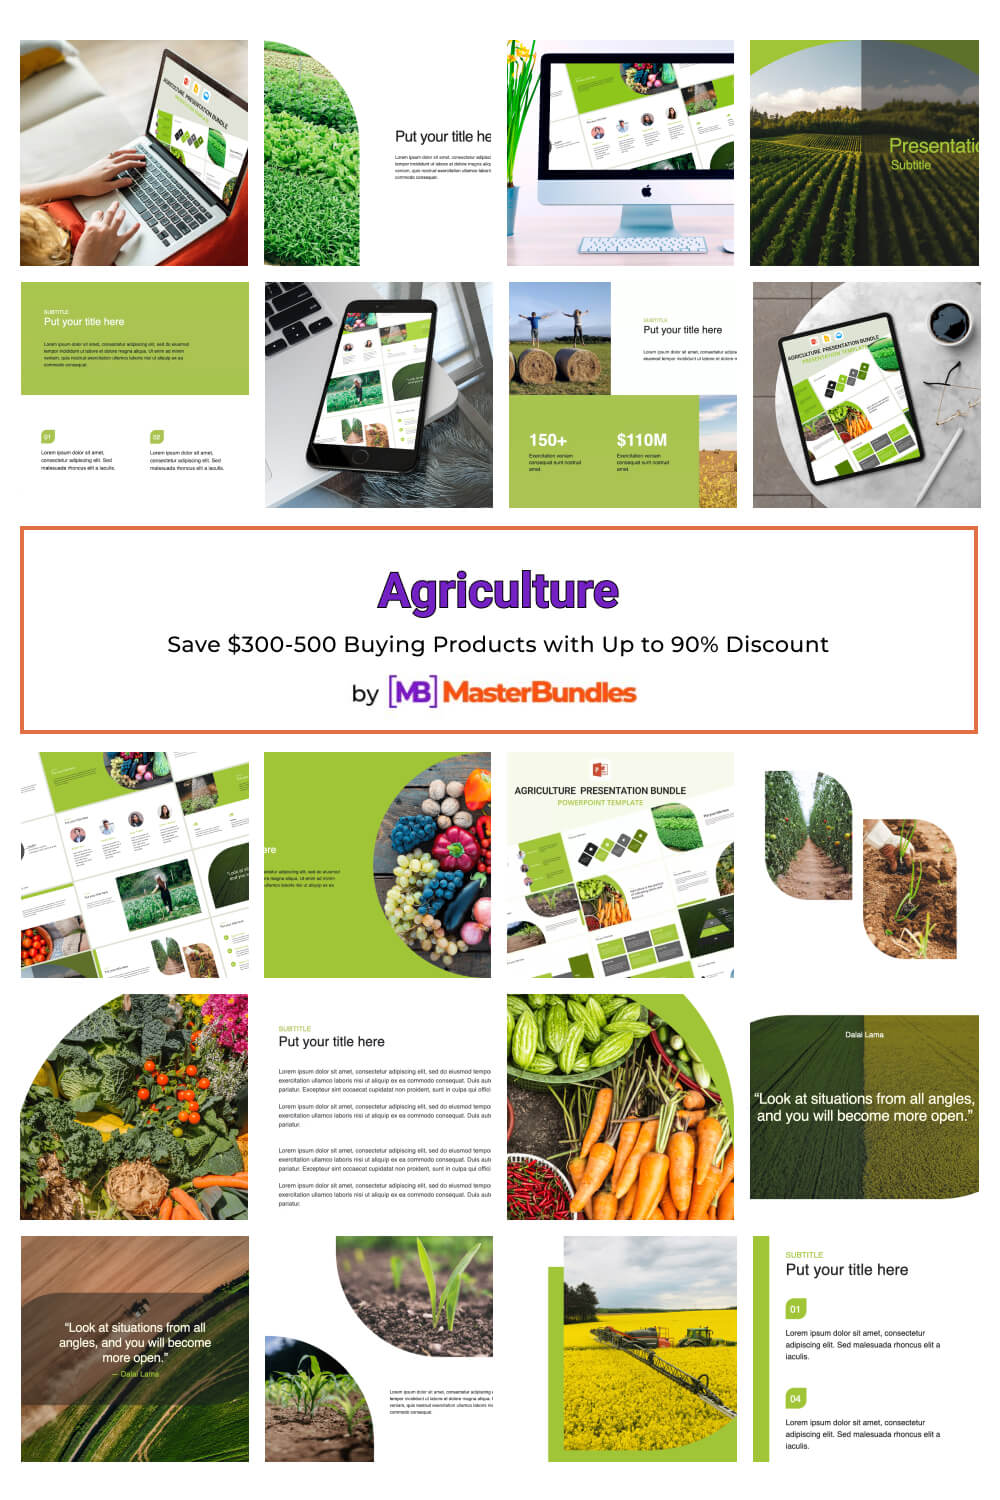 agriculture pinterest image.